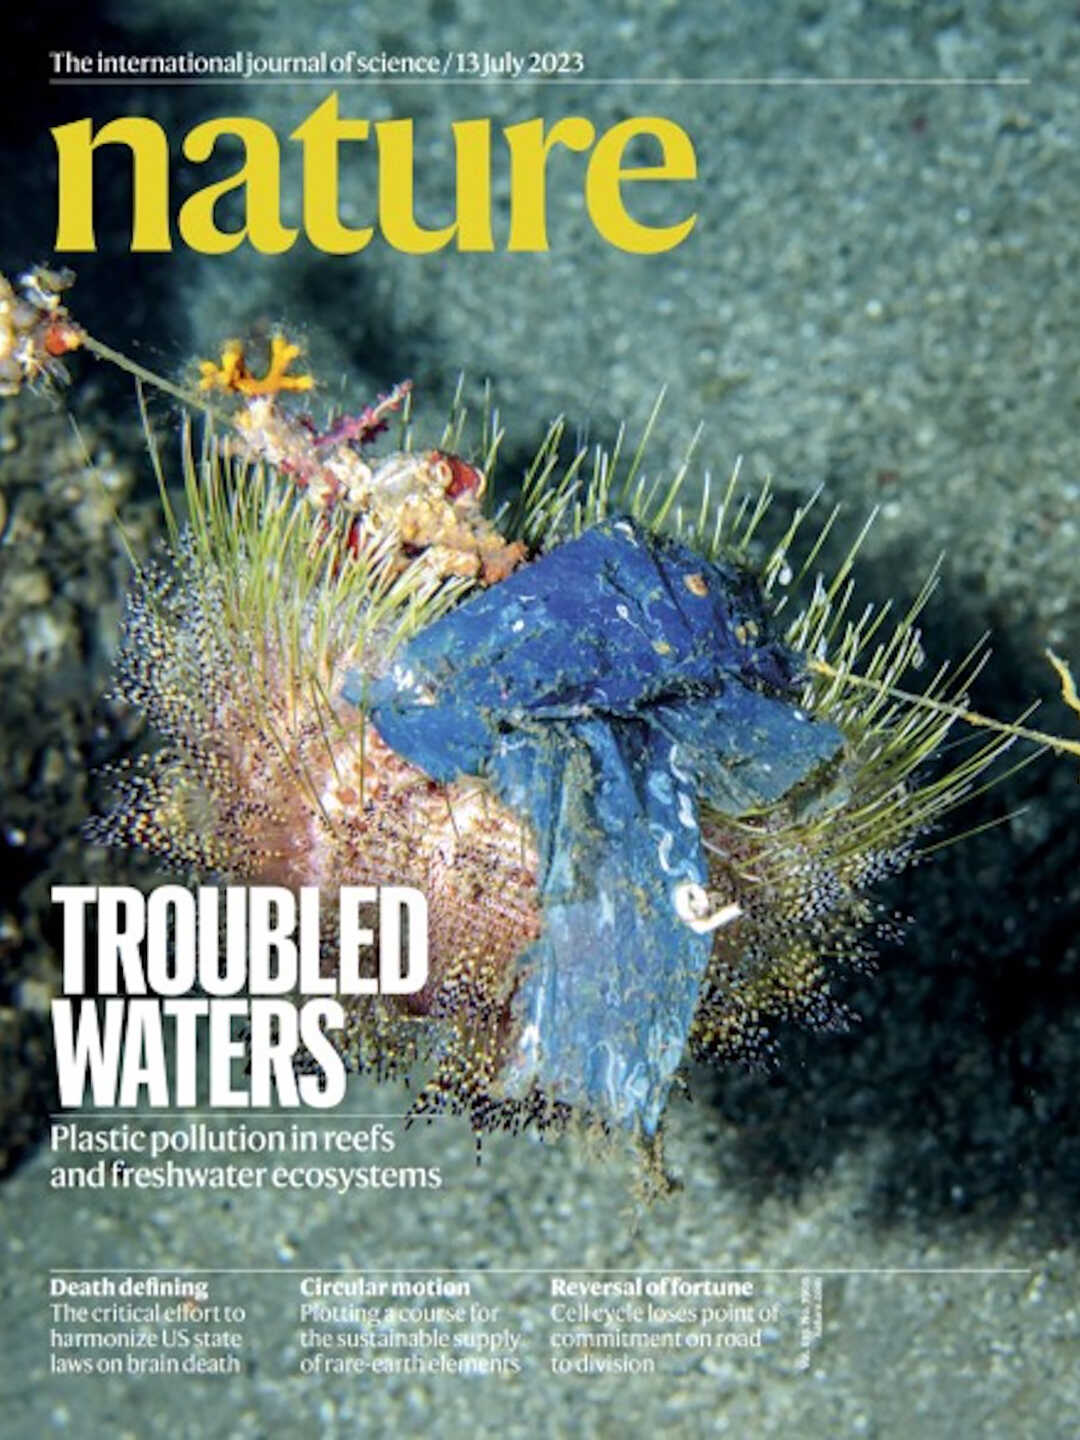 The cover of Nature journal with photo of debris-covered urchin by Luiz Rocha